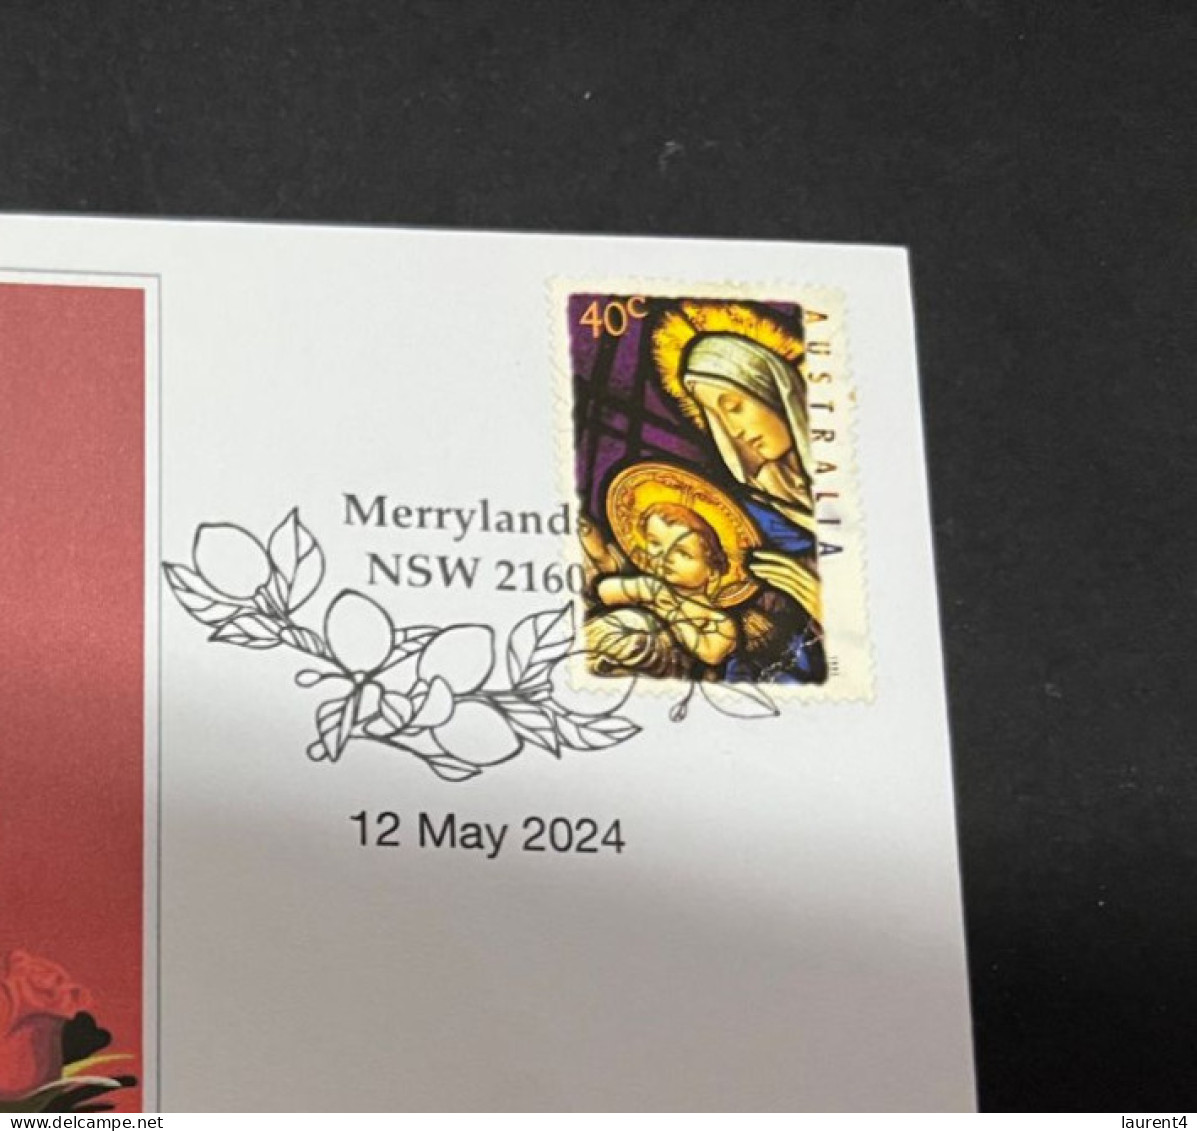 12-5-2024 (4 Z 47A) Mother's Day 2024 (12-5-2024 In Australia) Virgin Mary Stamp - Moederdag